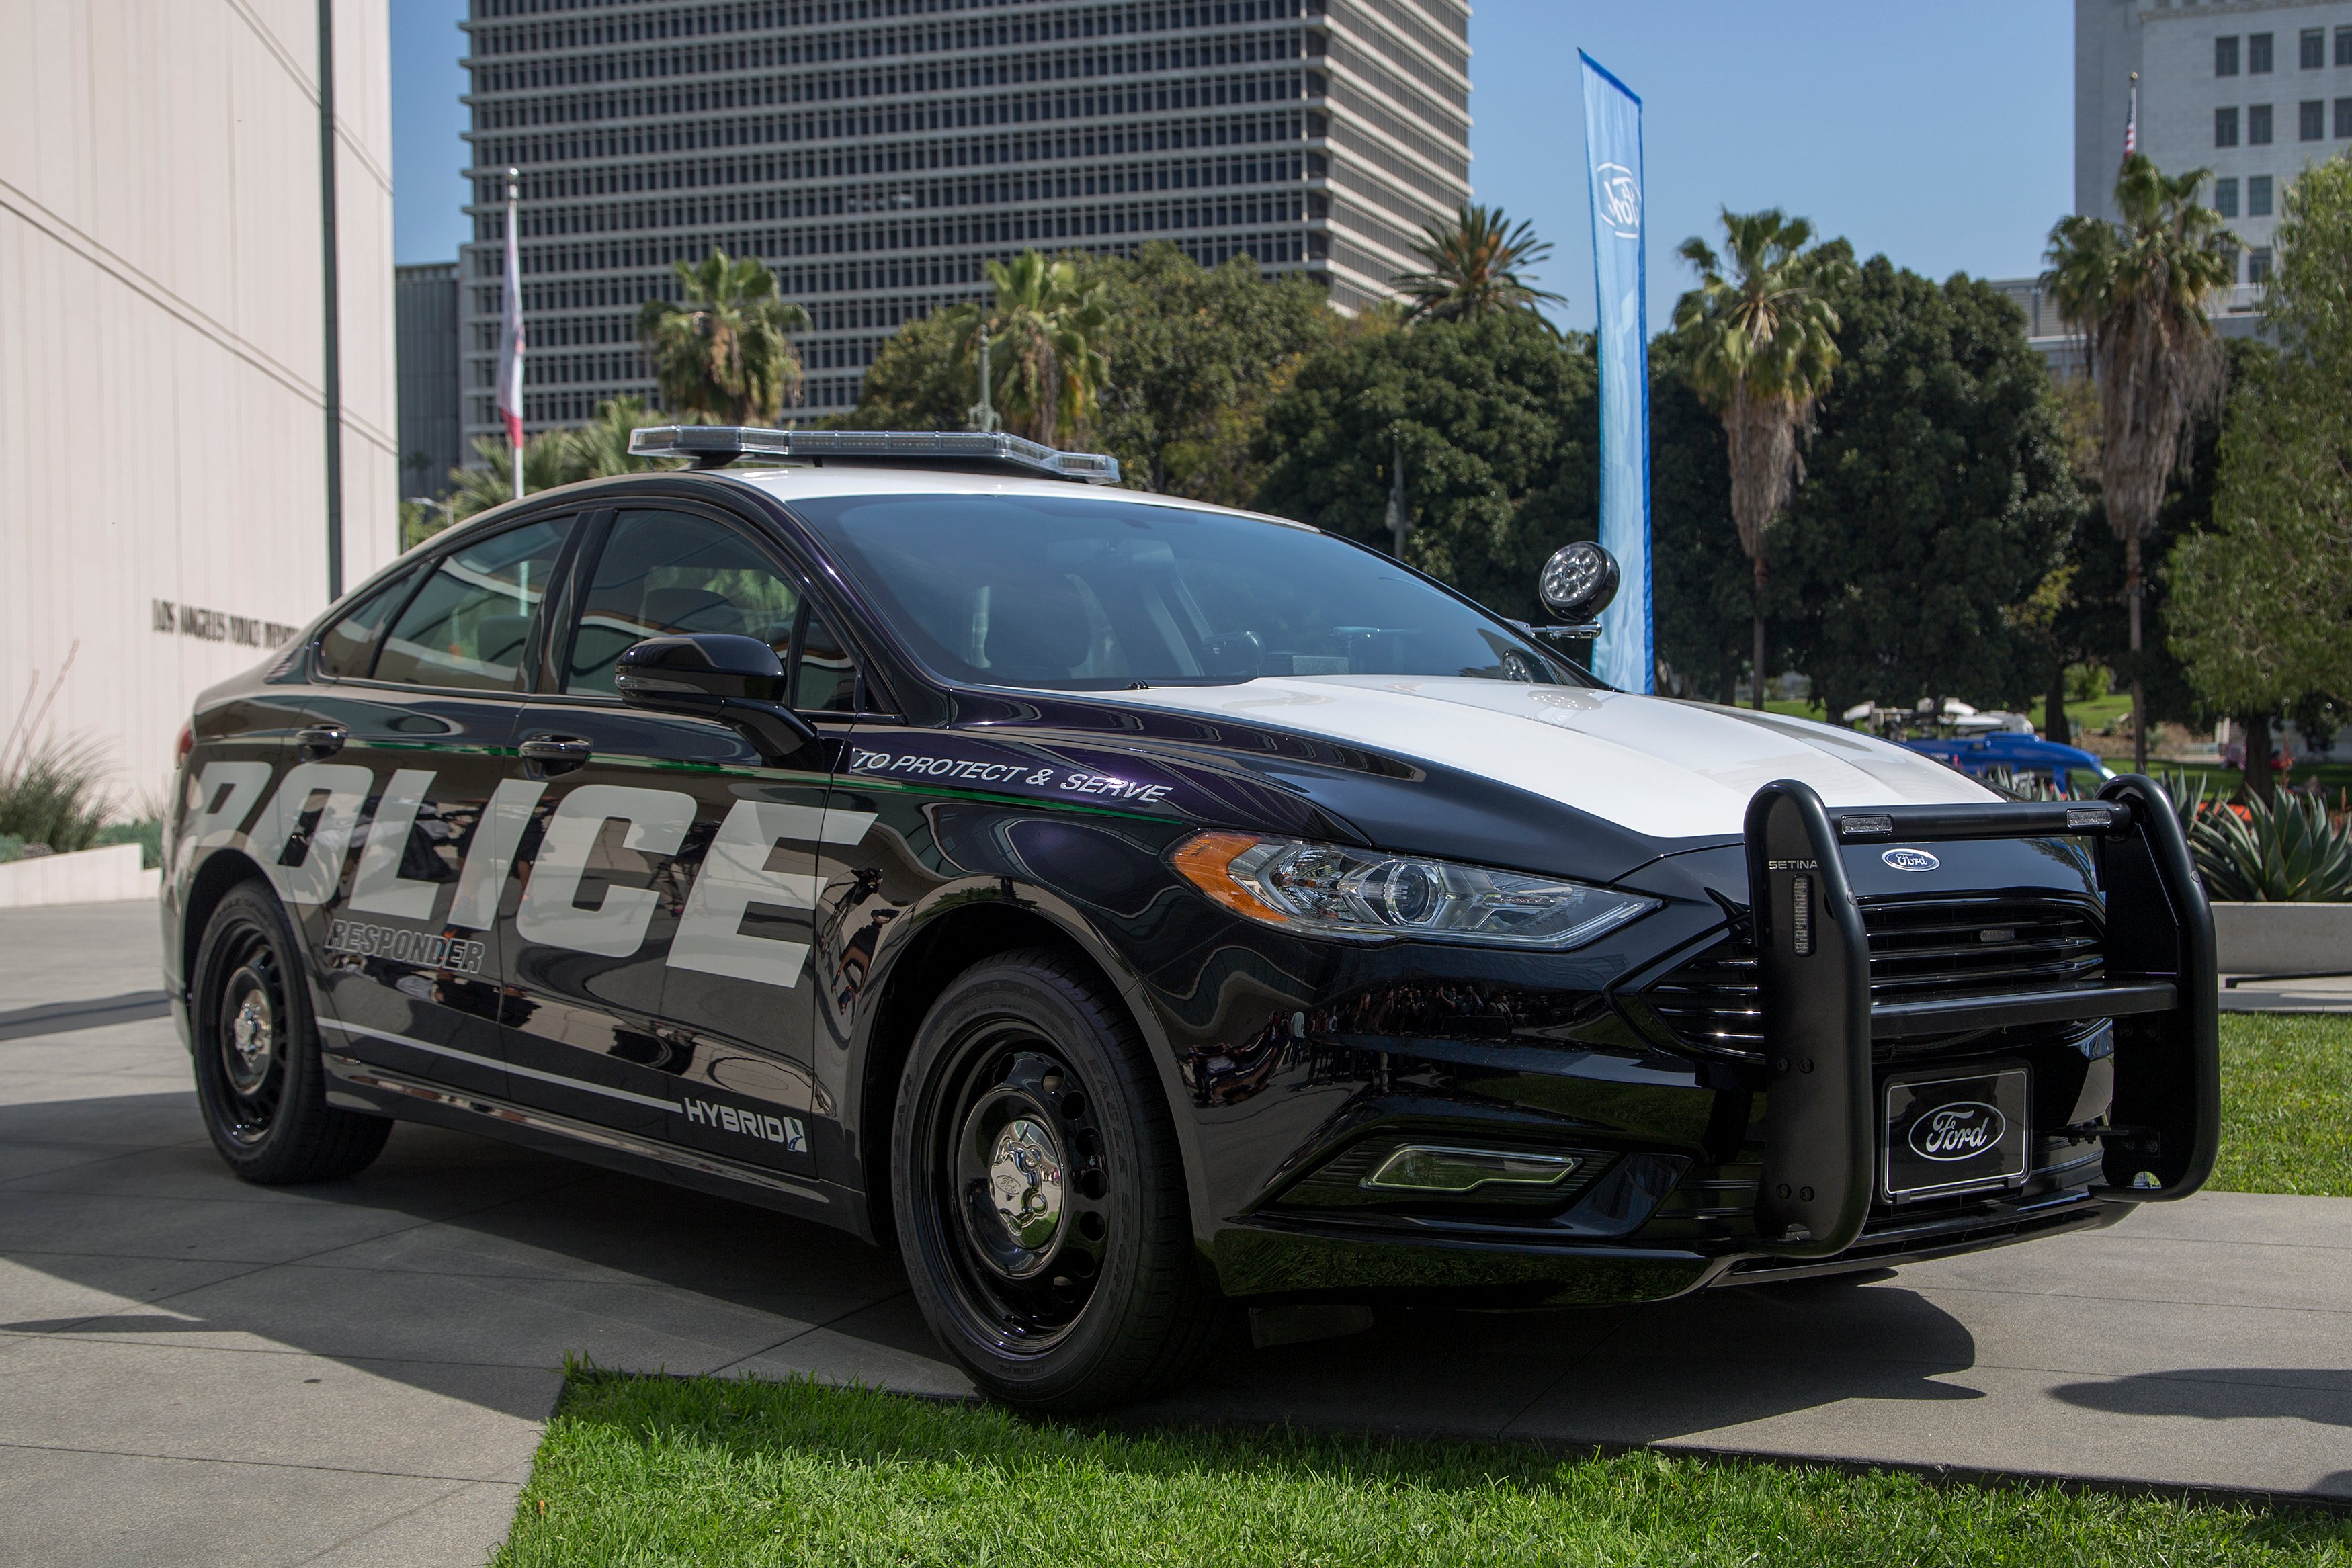 A hybrid police car is seen at the unveiling of two new Ford Fusion hybrid pursuit-rated Police Responder cars at Los Angeles Police Department headquarters on April 10, 2017 in Los Angeles, California. (Photo by David McNew/Getty Images)